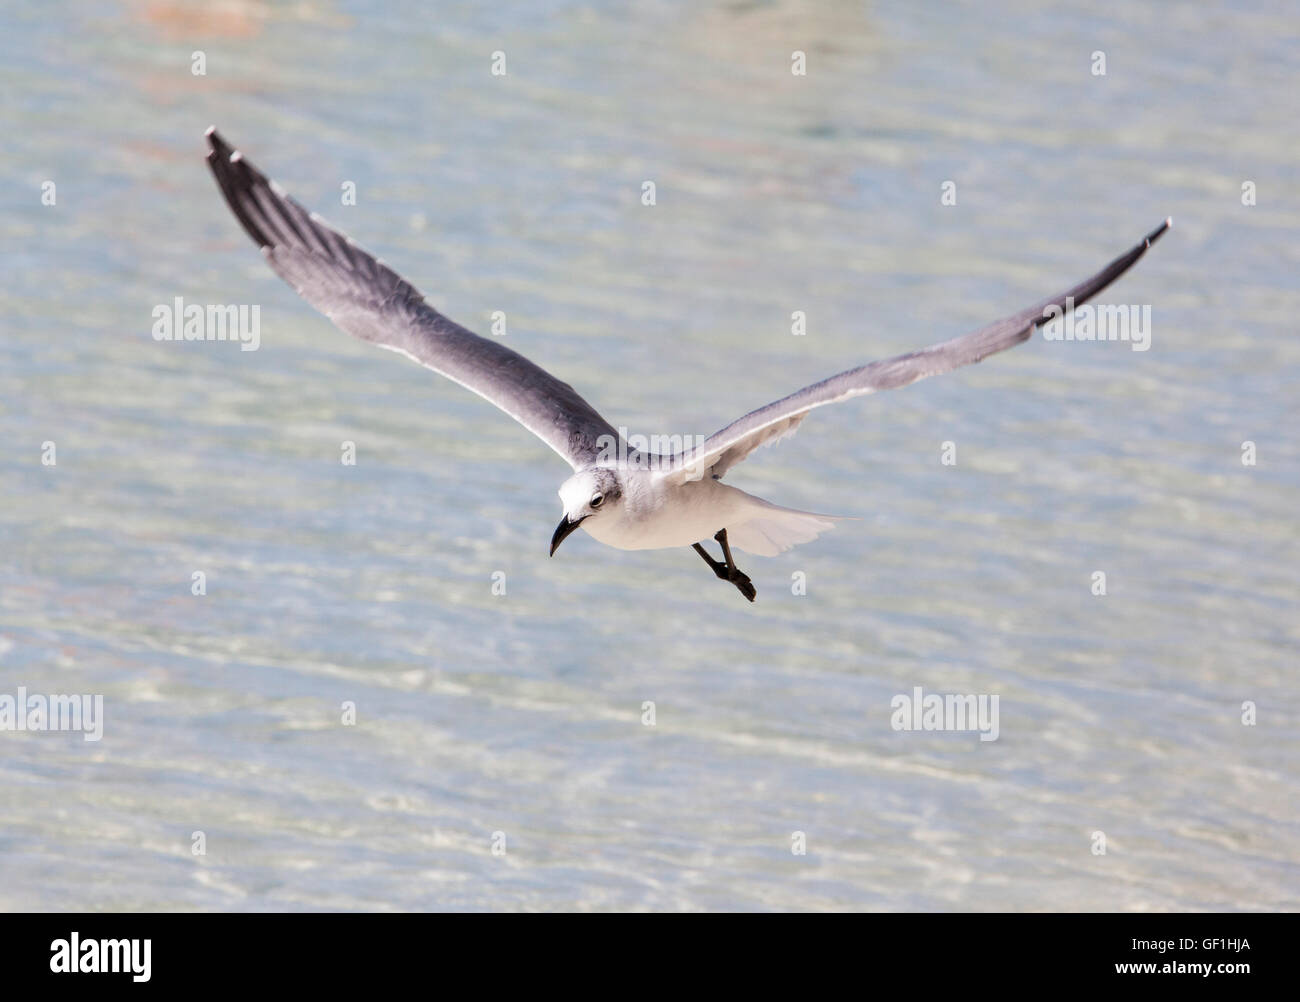 The flying seagull just above the water in Little Stirrup Cay beach (The Bahamas). Stock Photo